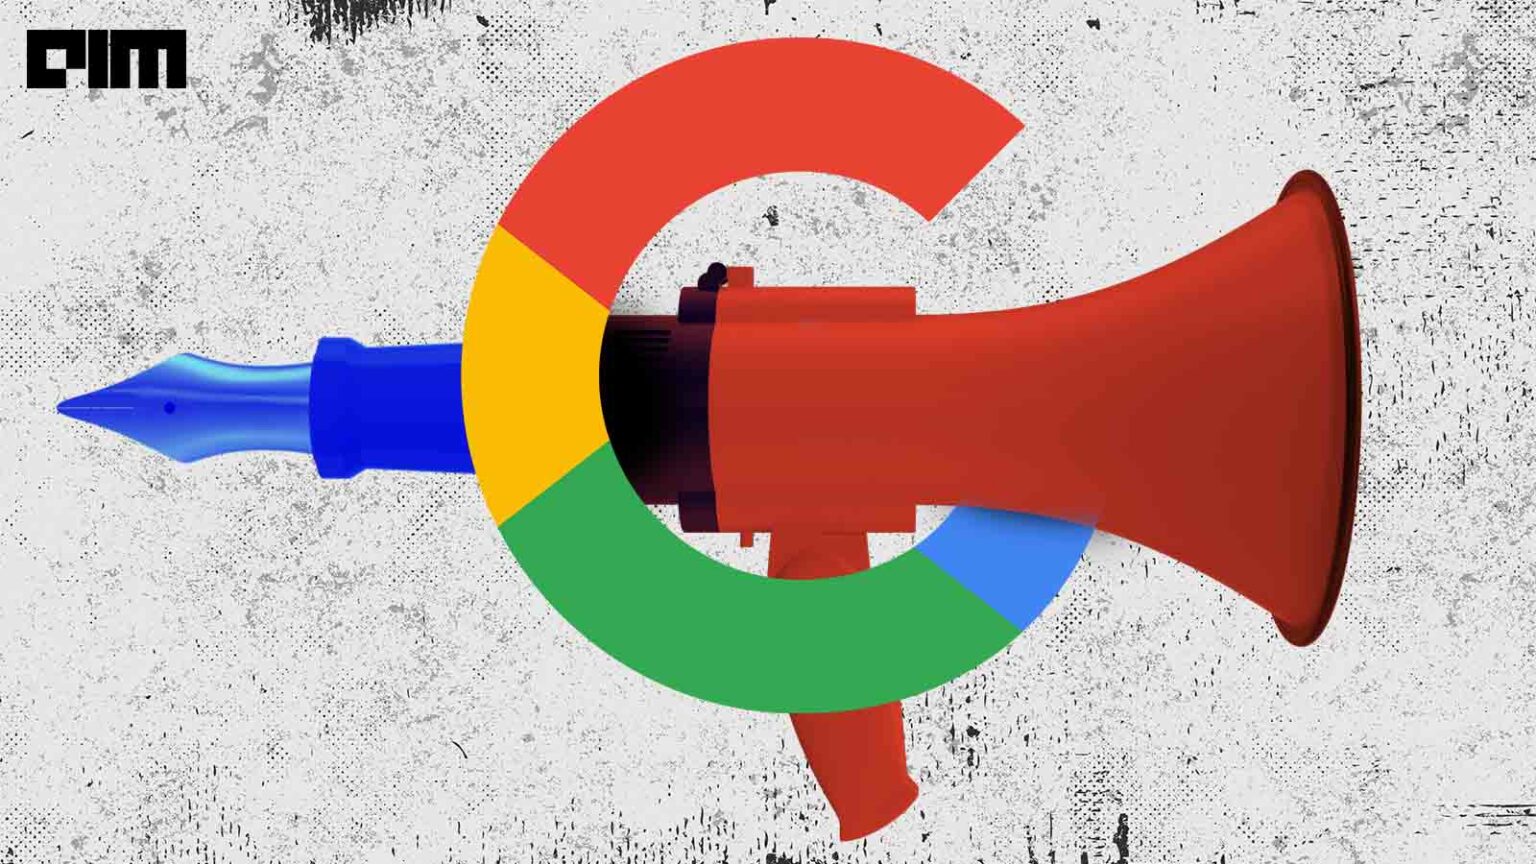 Linguistic Barriers Are Broken by Google USM's Multilingual Speech Recognition Model